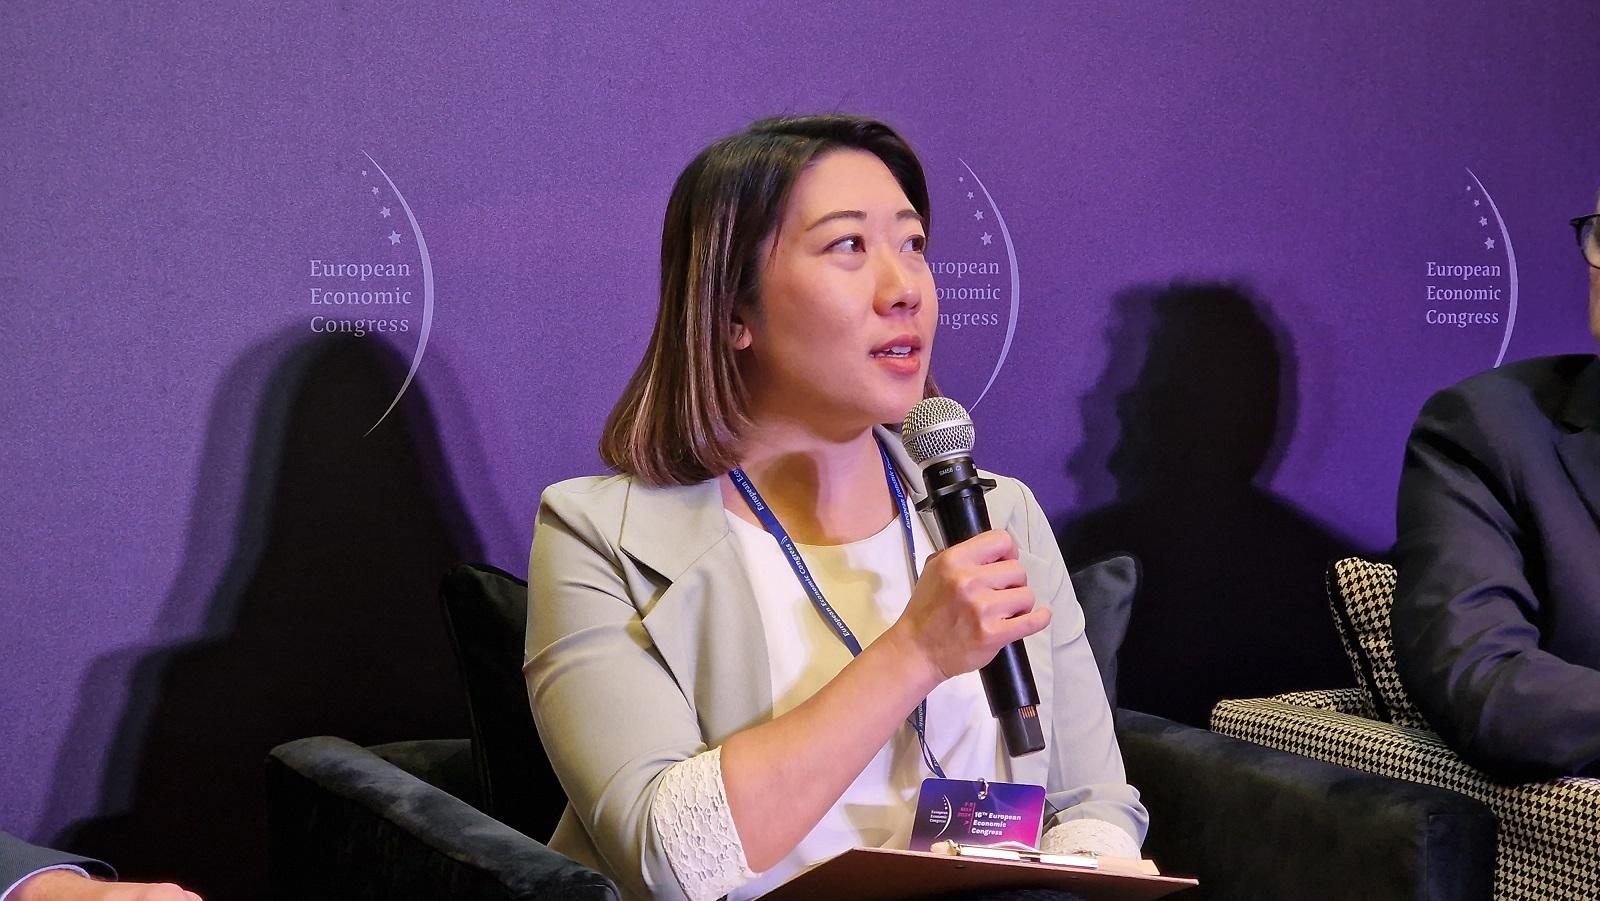 The Director of the Hong Kong Economic and Trade Office, Berlin, Ms Jenny Szeto, speaks at a panel during the 16th European Economic Congress on May 8 (Katowice time).